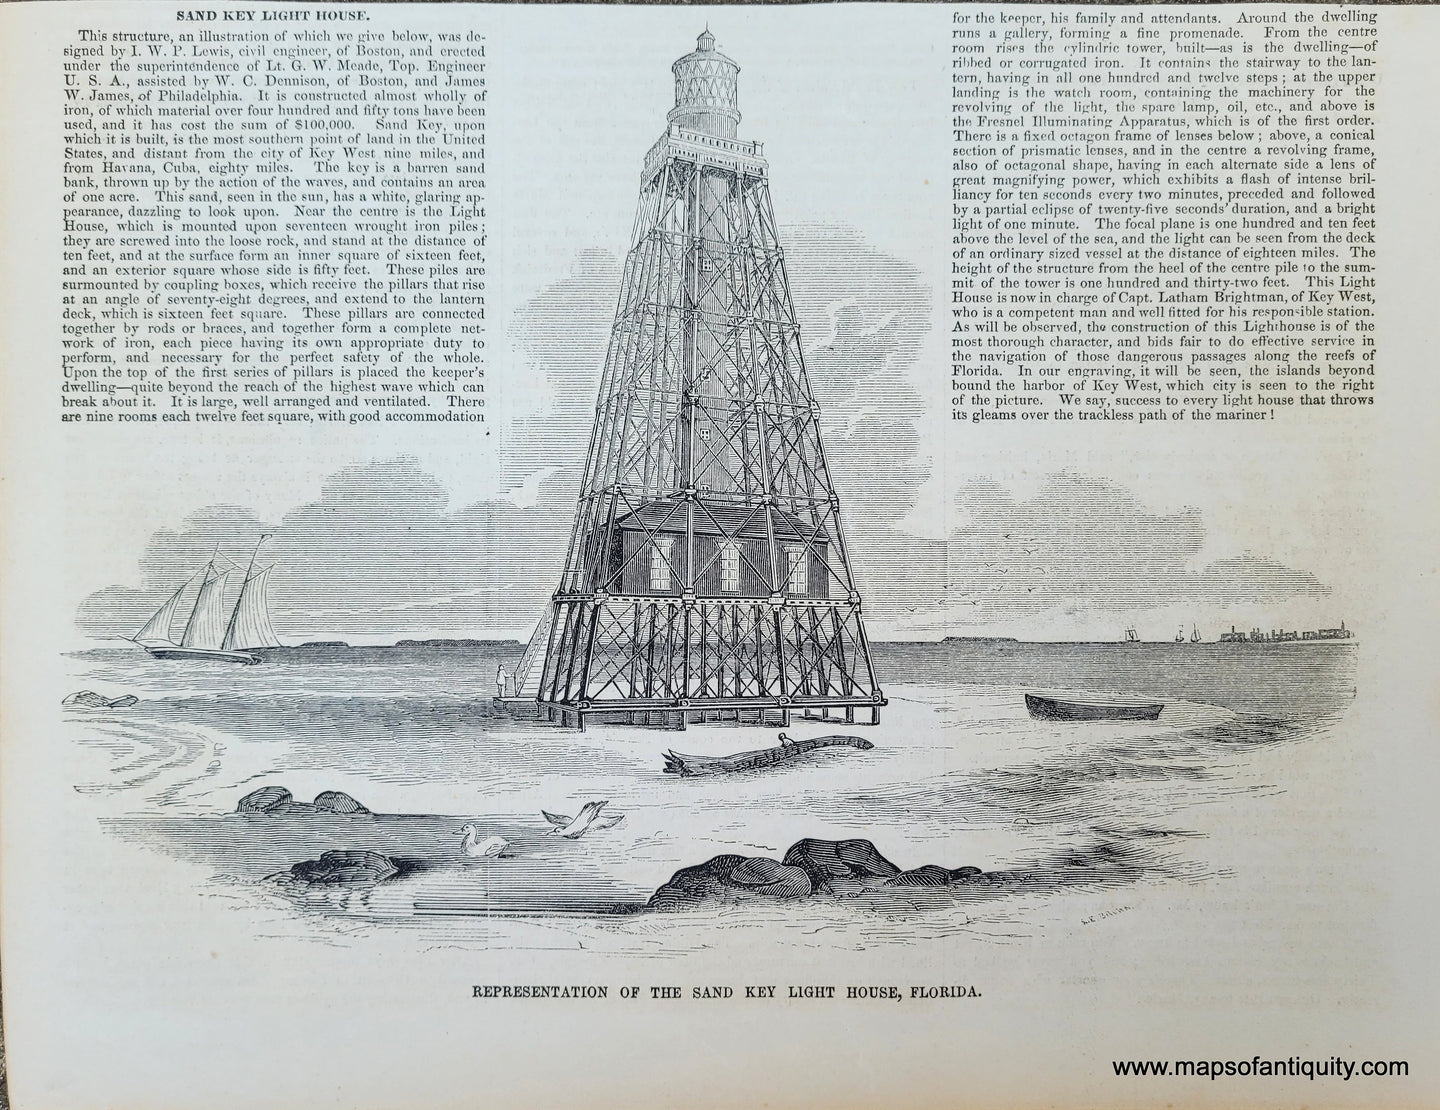 Genuine-Antique-Illustration-Print-Representation-of-the-Sand-Key-Light-House,-Florida-1854-Gleason's-Pictorial-Drawing-Room-Companion-PRN062-Maps-Of-Antiquity